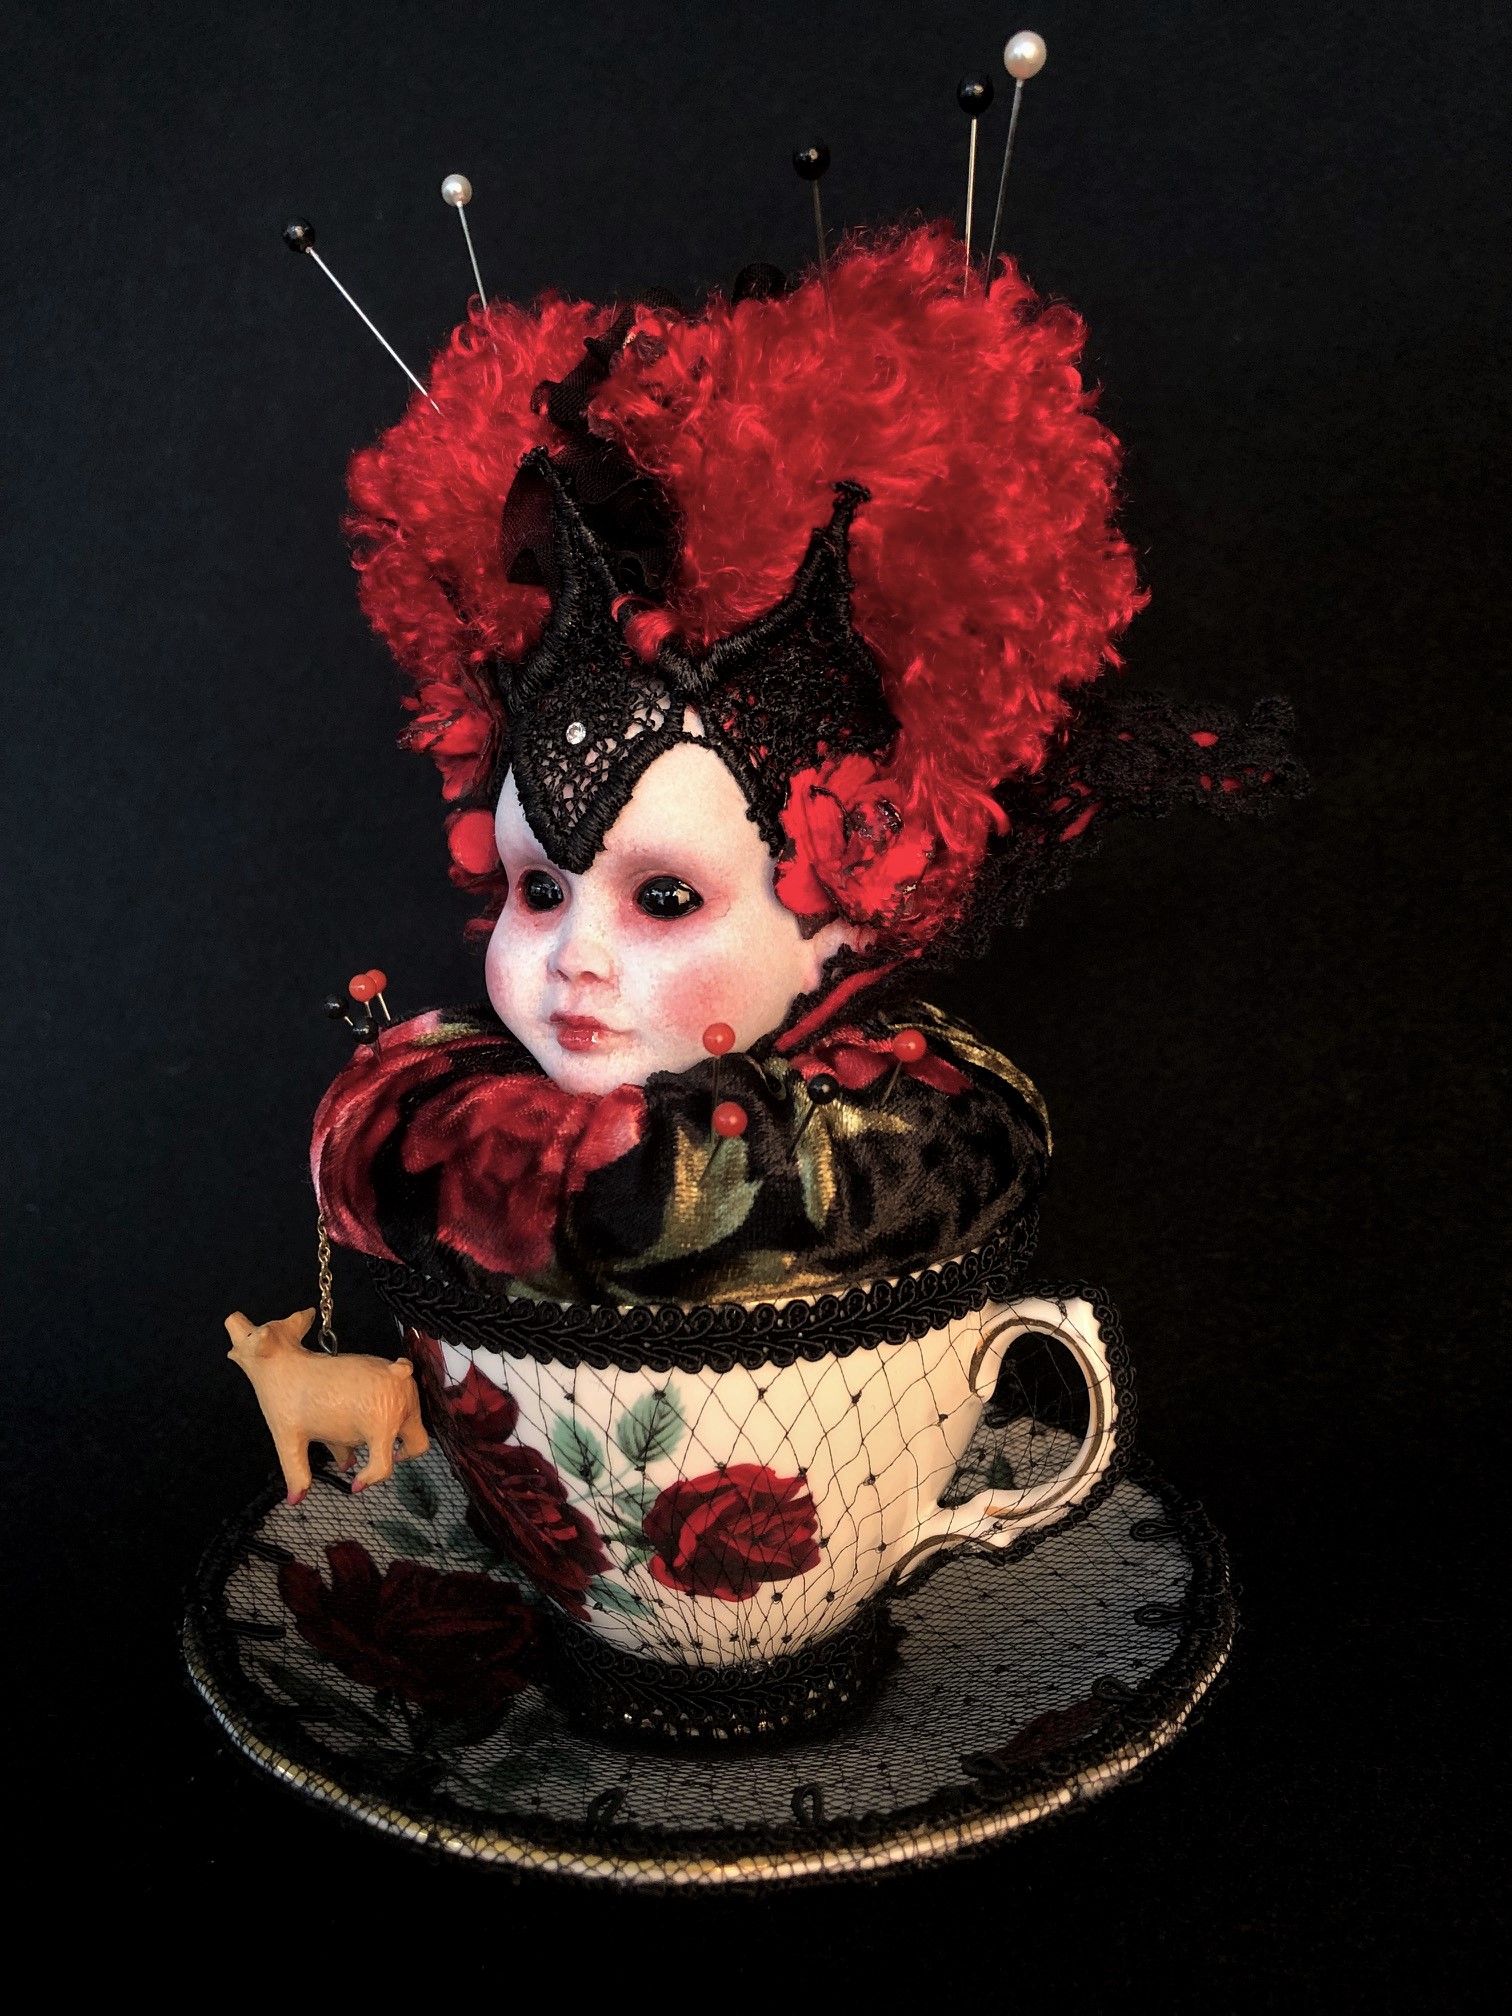 queen of hearts themed velvet pincushion porcelain dollhead sits in a bone china teacup with red roses